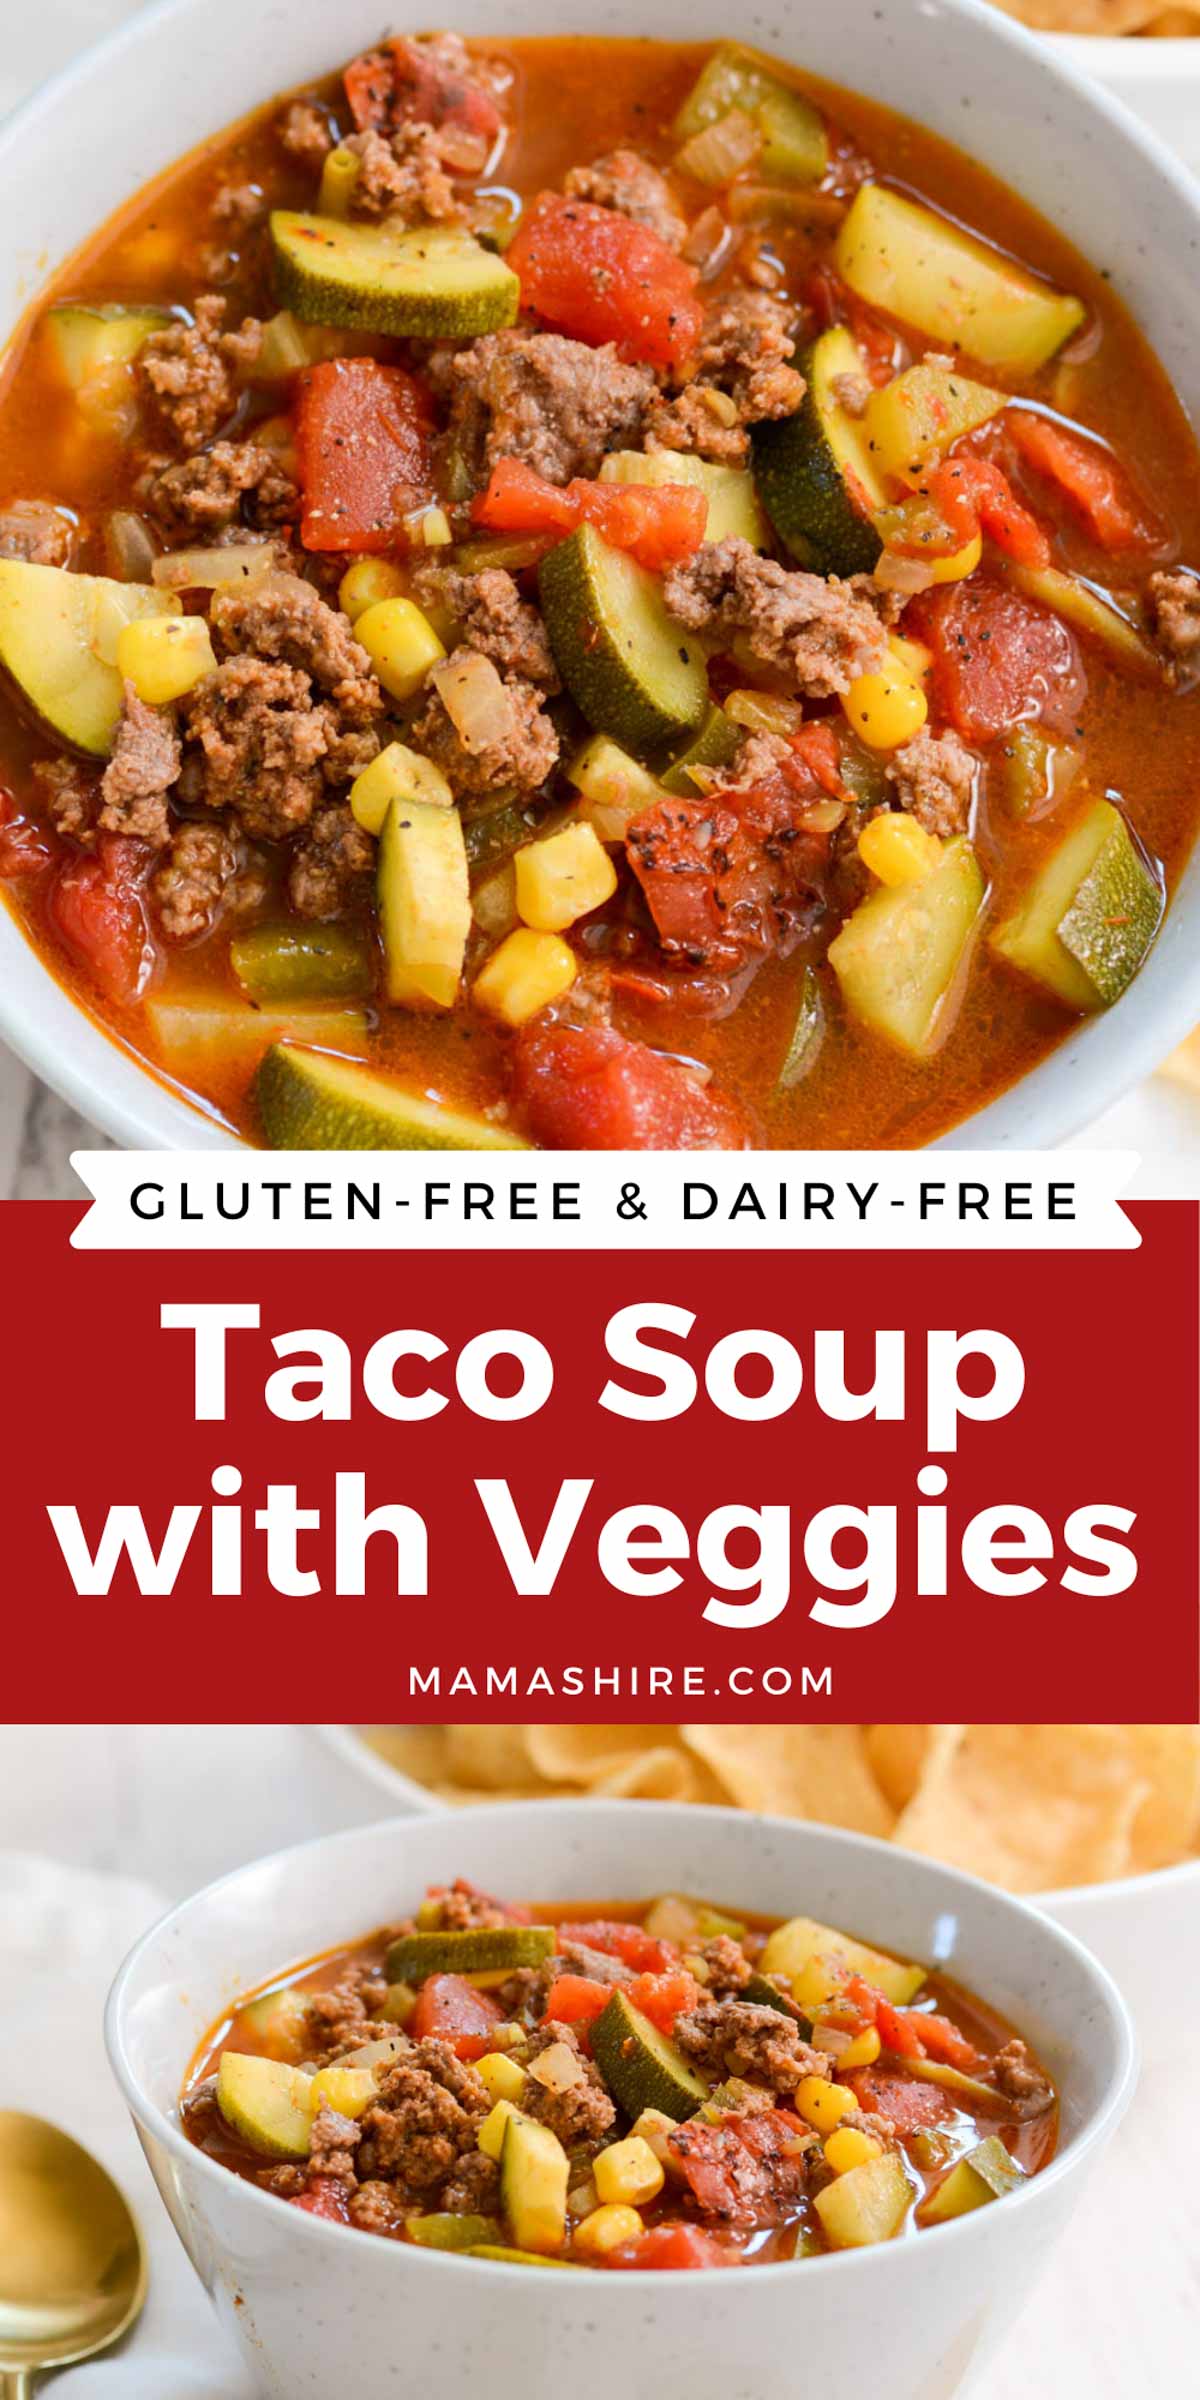 Red bowl of gluten-free taco soup.